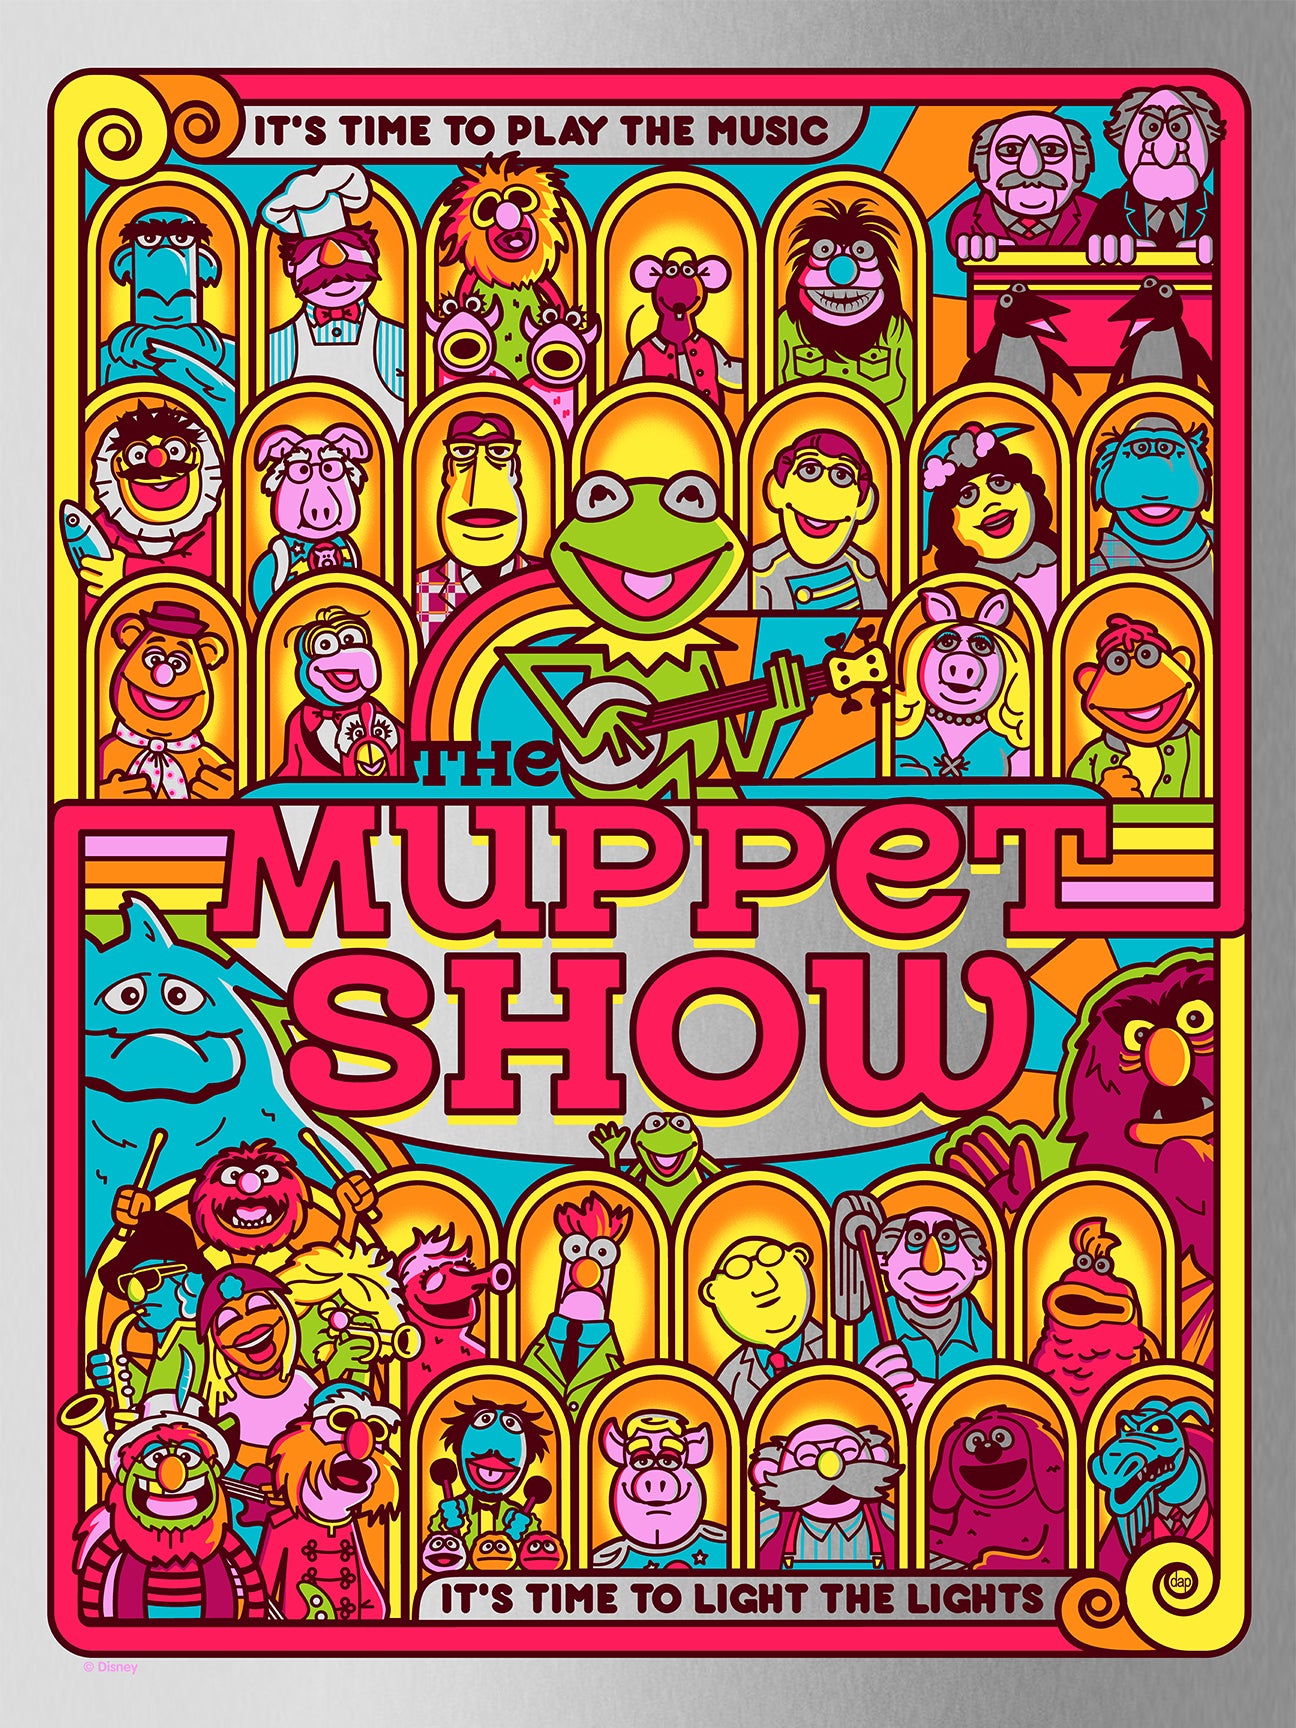 Dave Perillo "The Muppet Show" Foil Variant